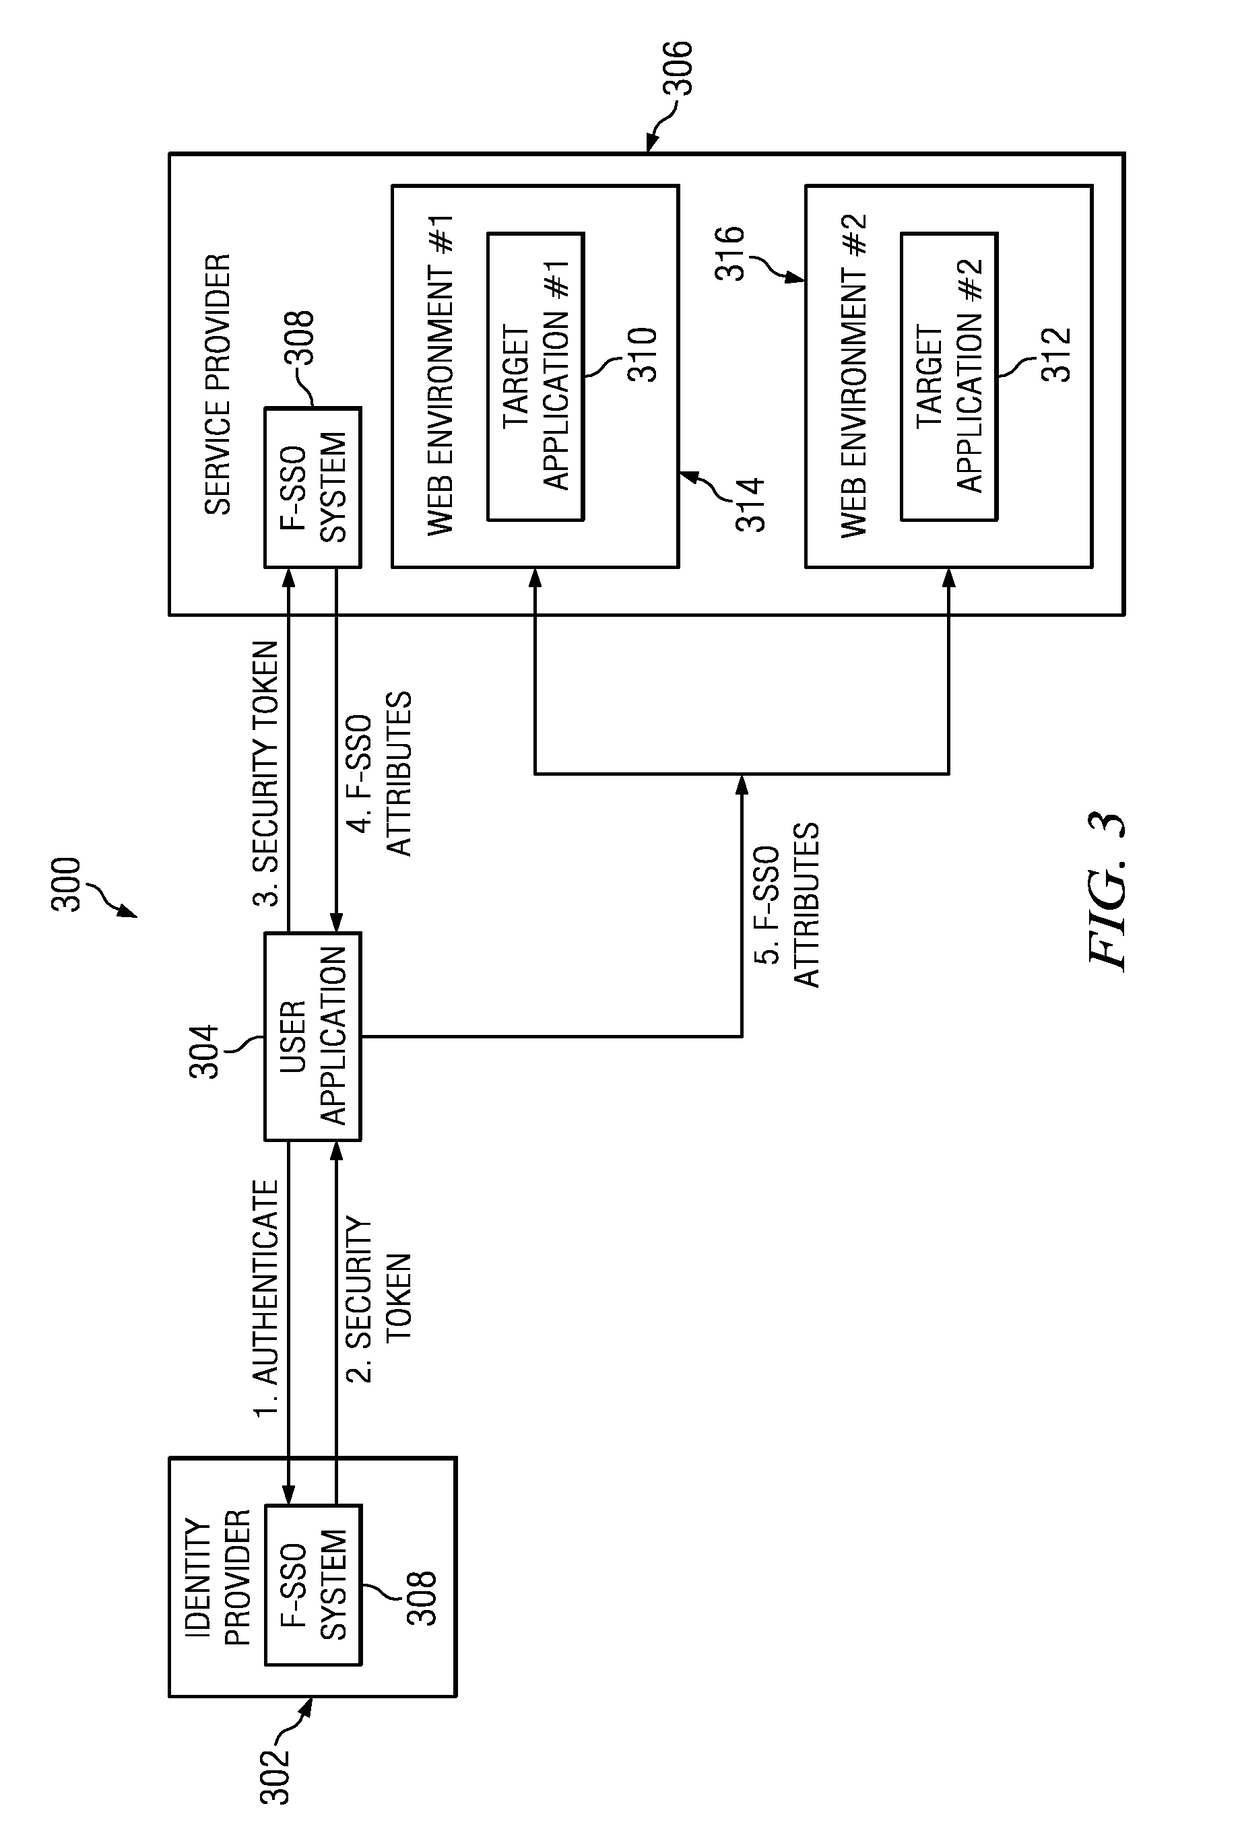 Method and system for authenticating a rich client to a web or cloud application